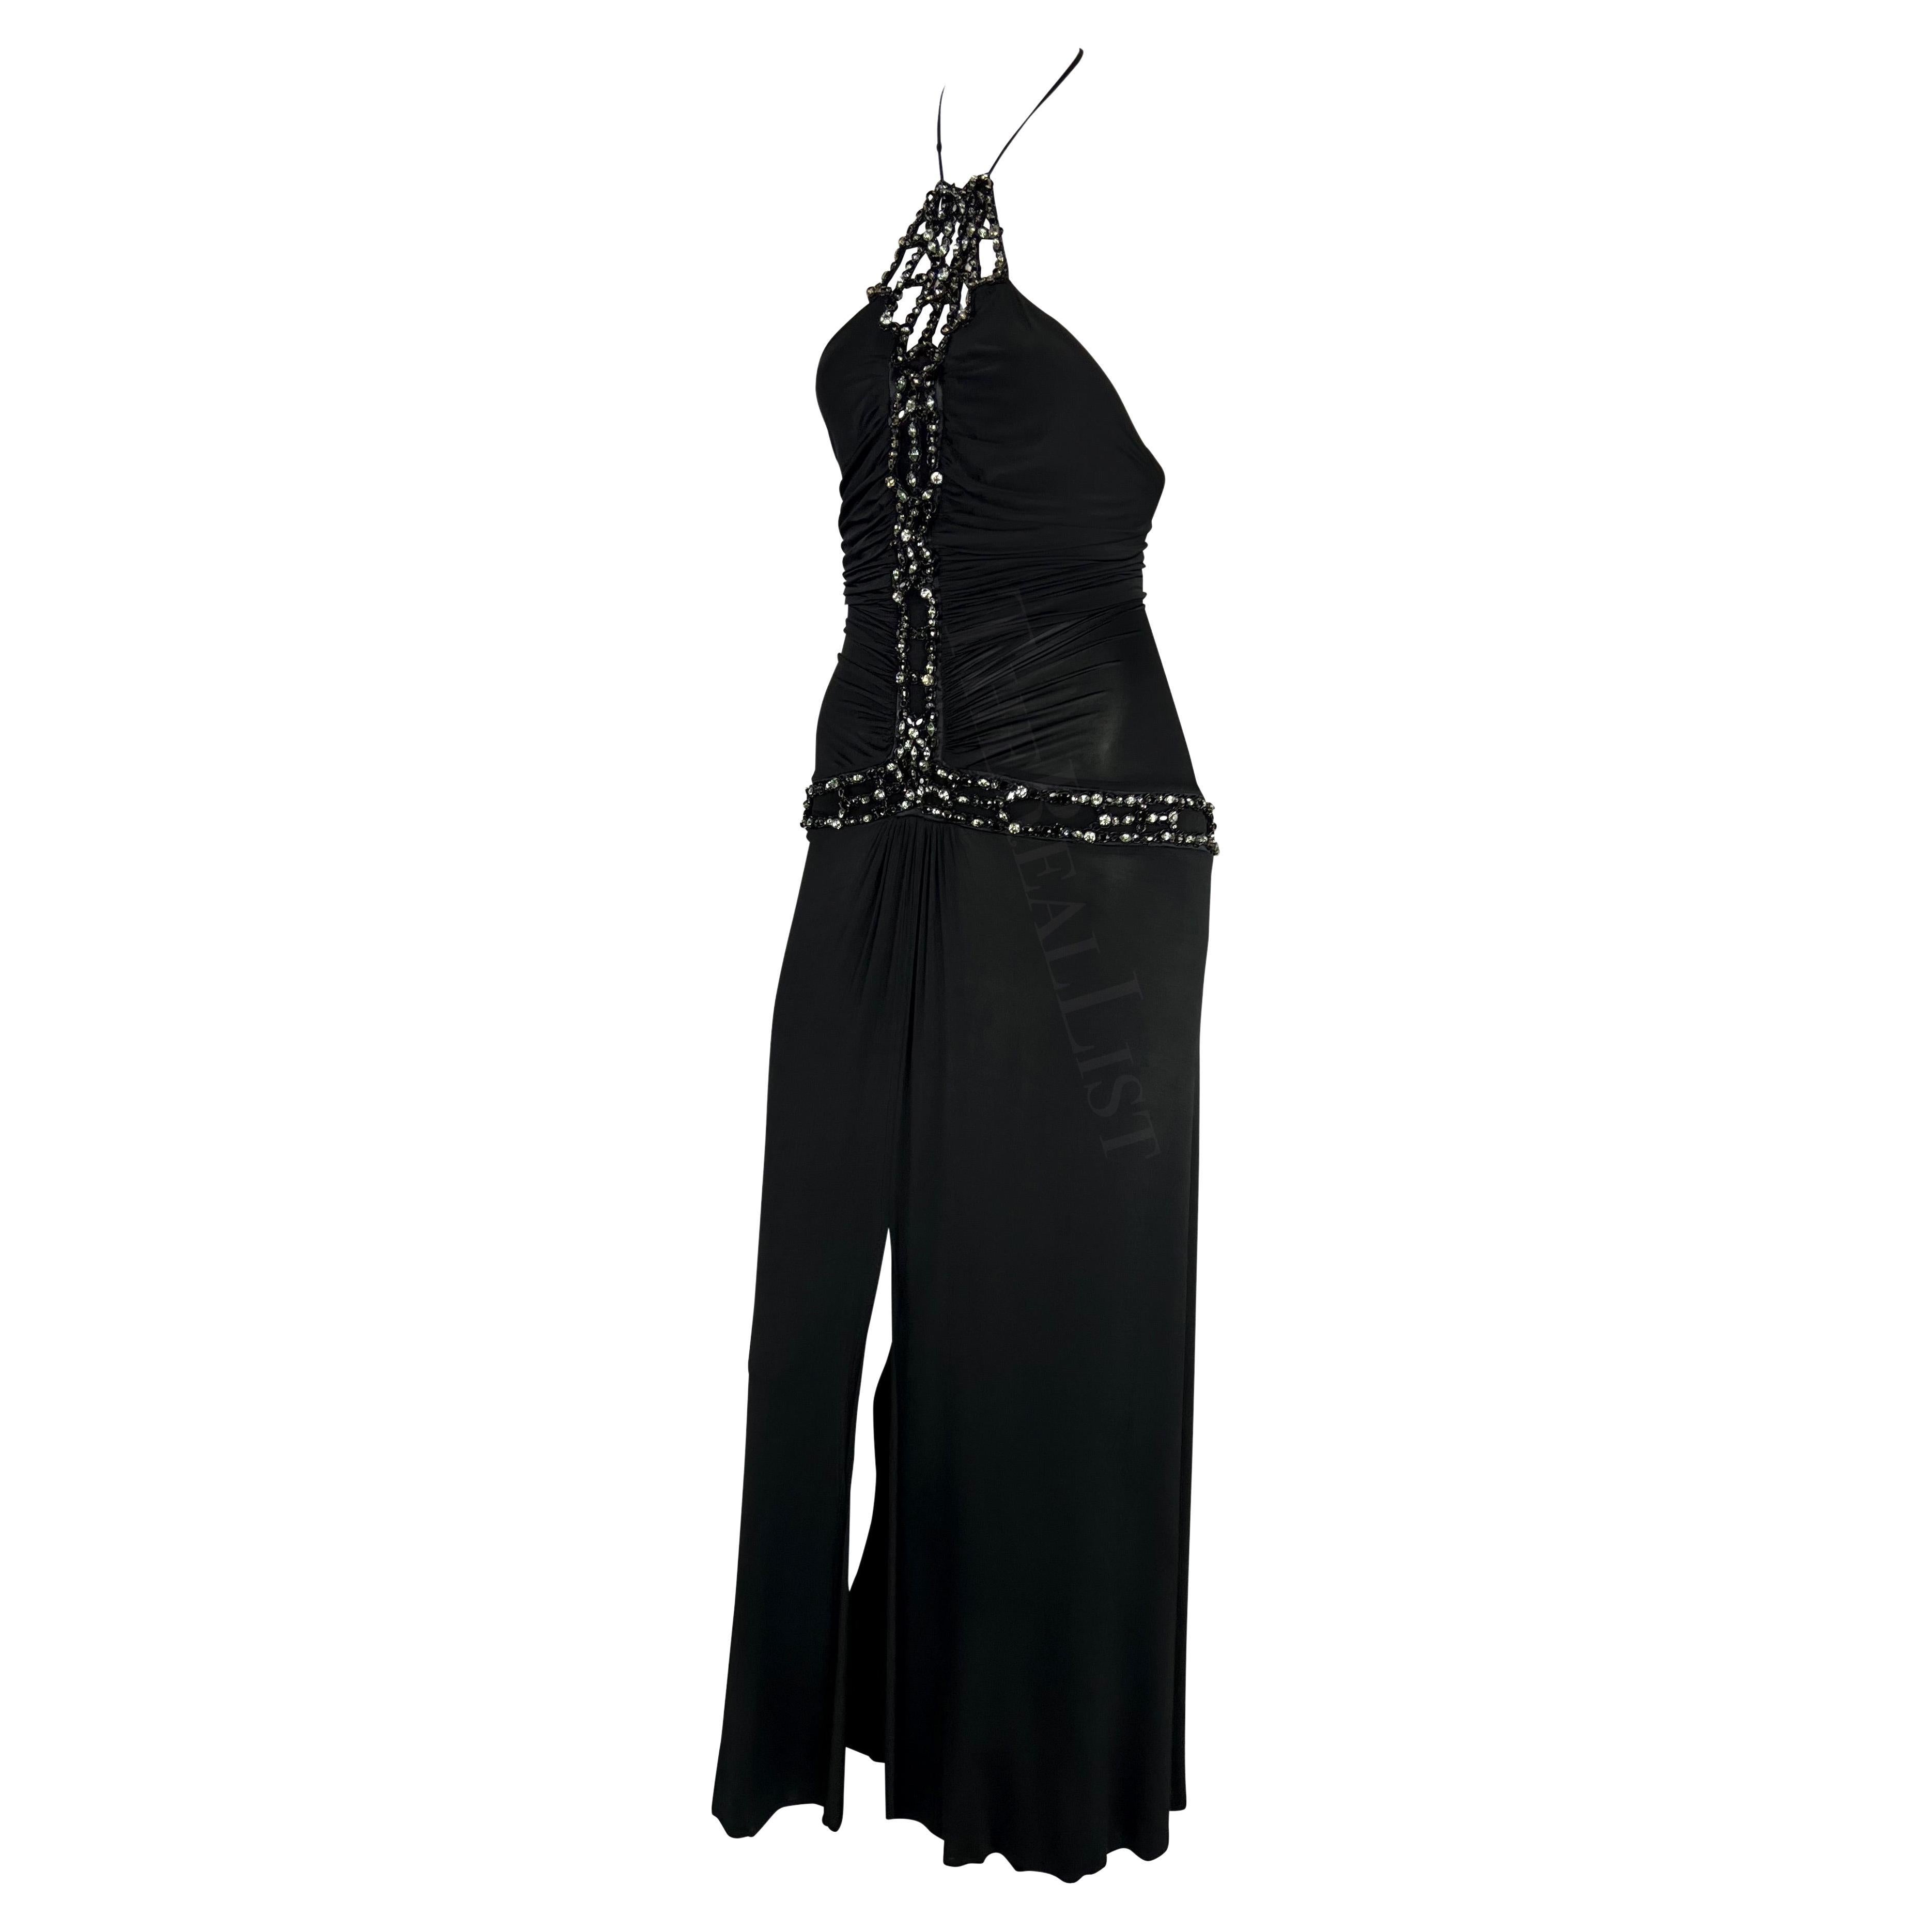 Presenting a fabulous black Roberto Cavalli slinky gown. From the Spring/Summer 2005 collection, this full-length dress features a halter neck and rhinestone embellishments that go down the front of the dress and around the hips. This form-fitting